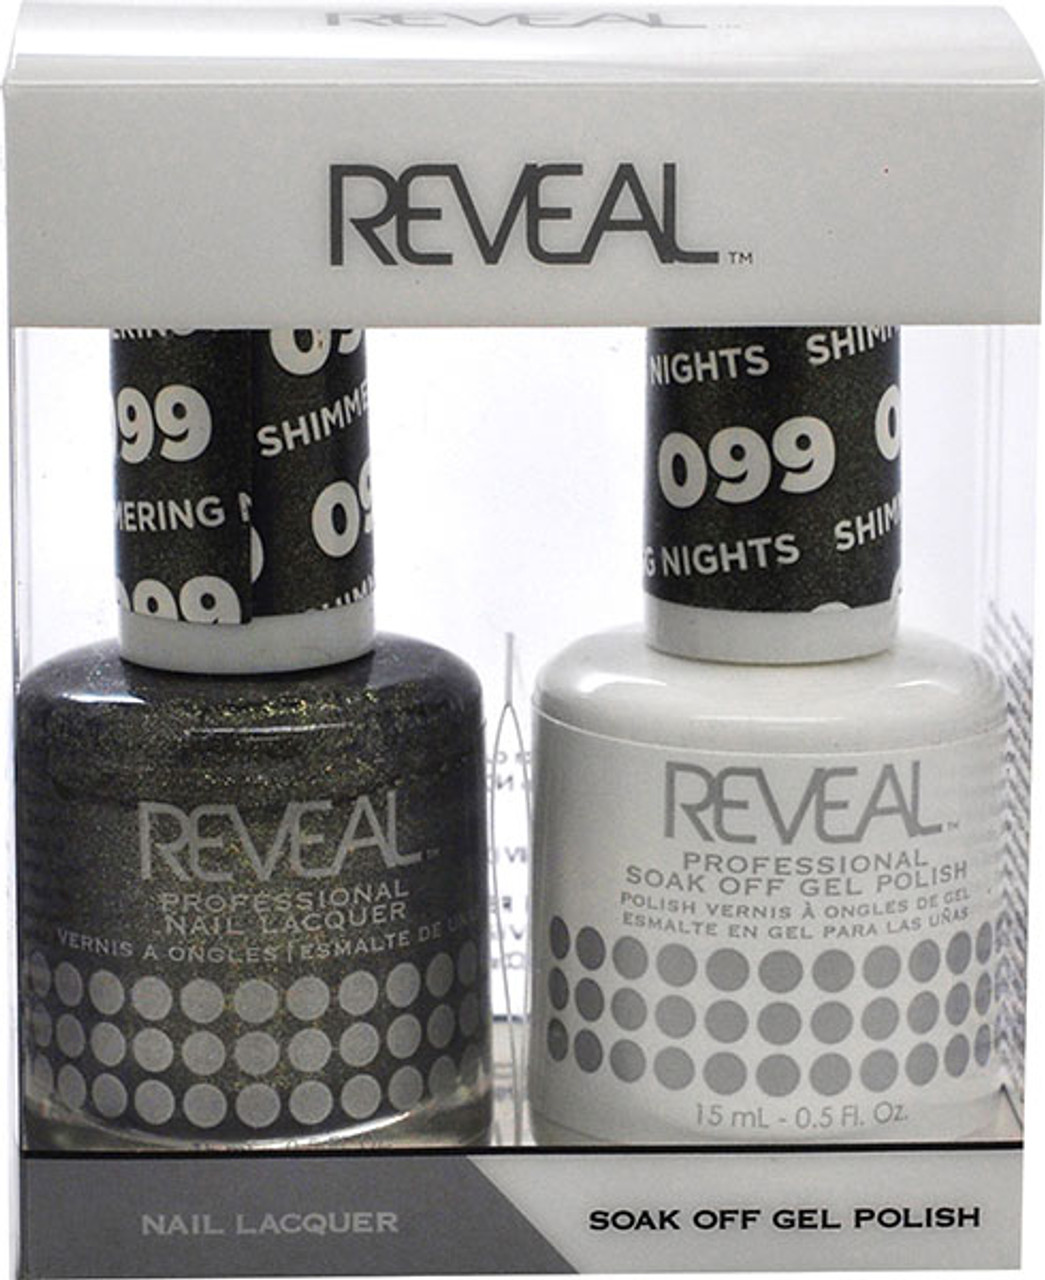 Reveal Gel Polish & Nail Lacquer Matching Duo - SHIMMERING NIGHTS - .5 oz